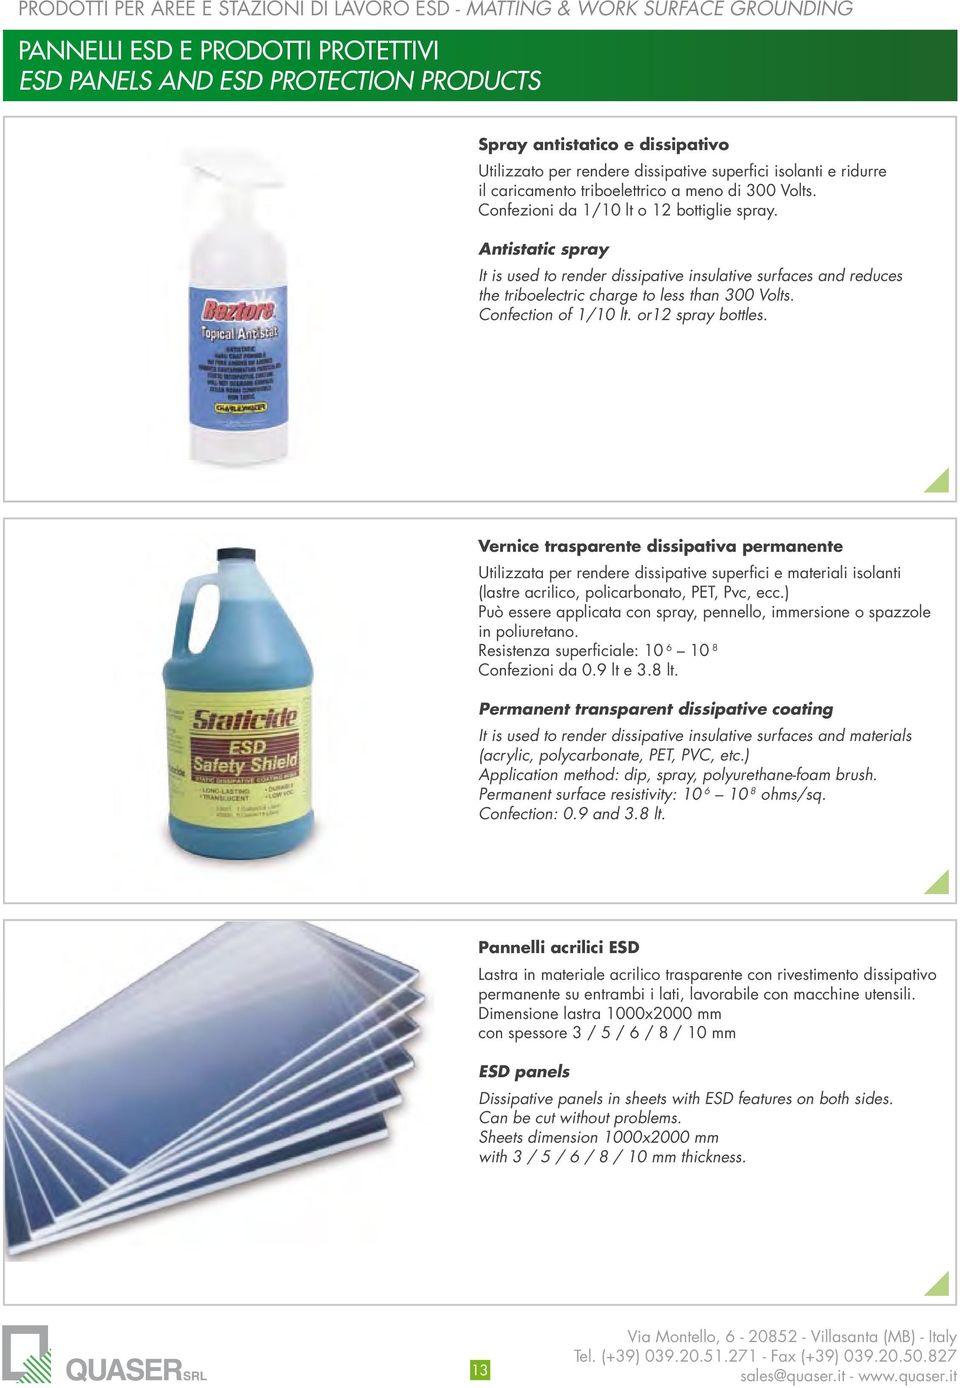 Antistatic spray It is used to render dissipative insulative surfaces and reduces the triboelectric charge to less than 300 Volts. Confection of 1/10 lt. or12 spray bottles.